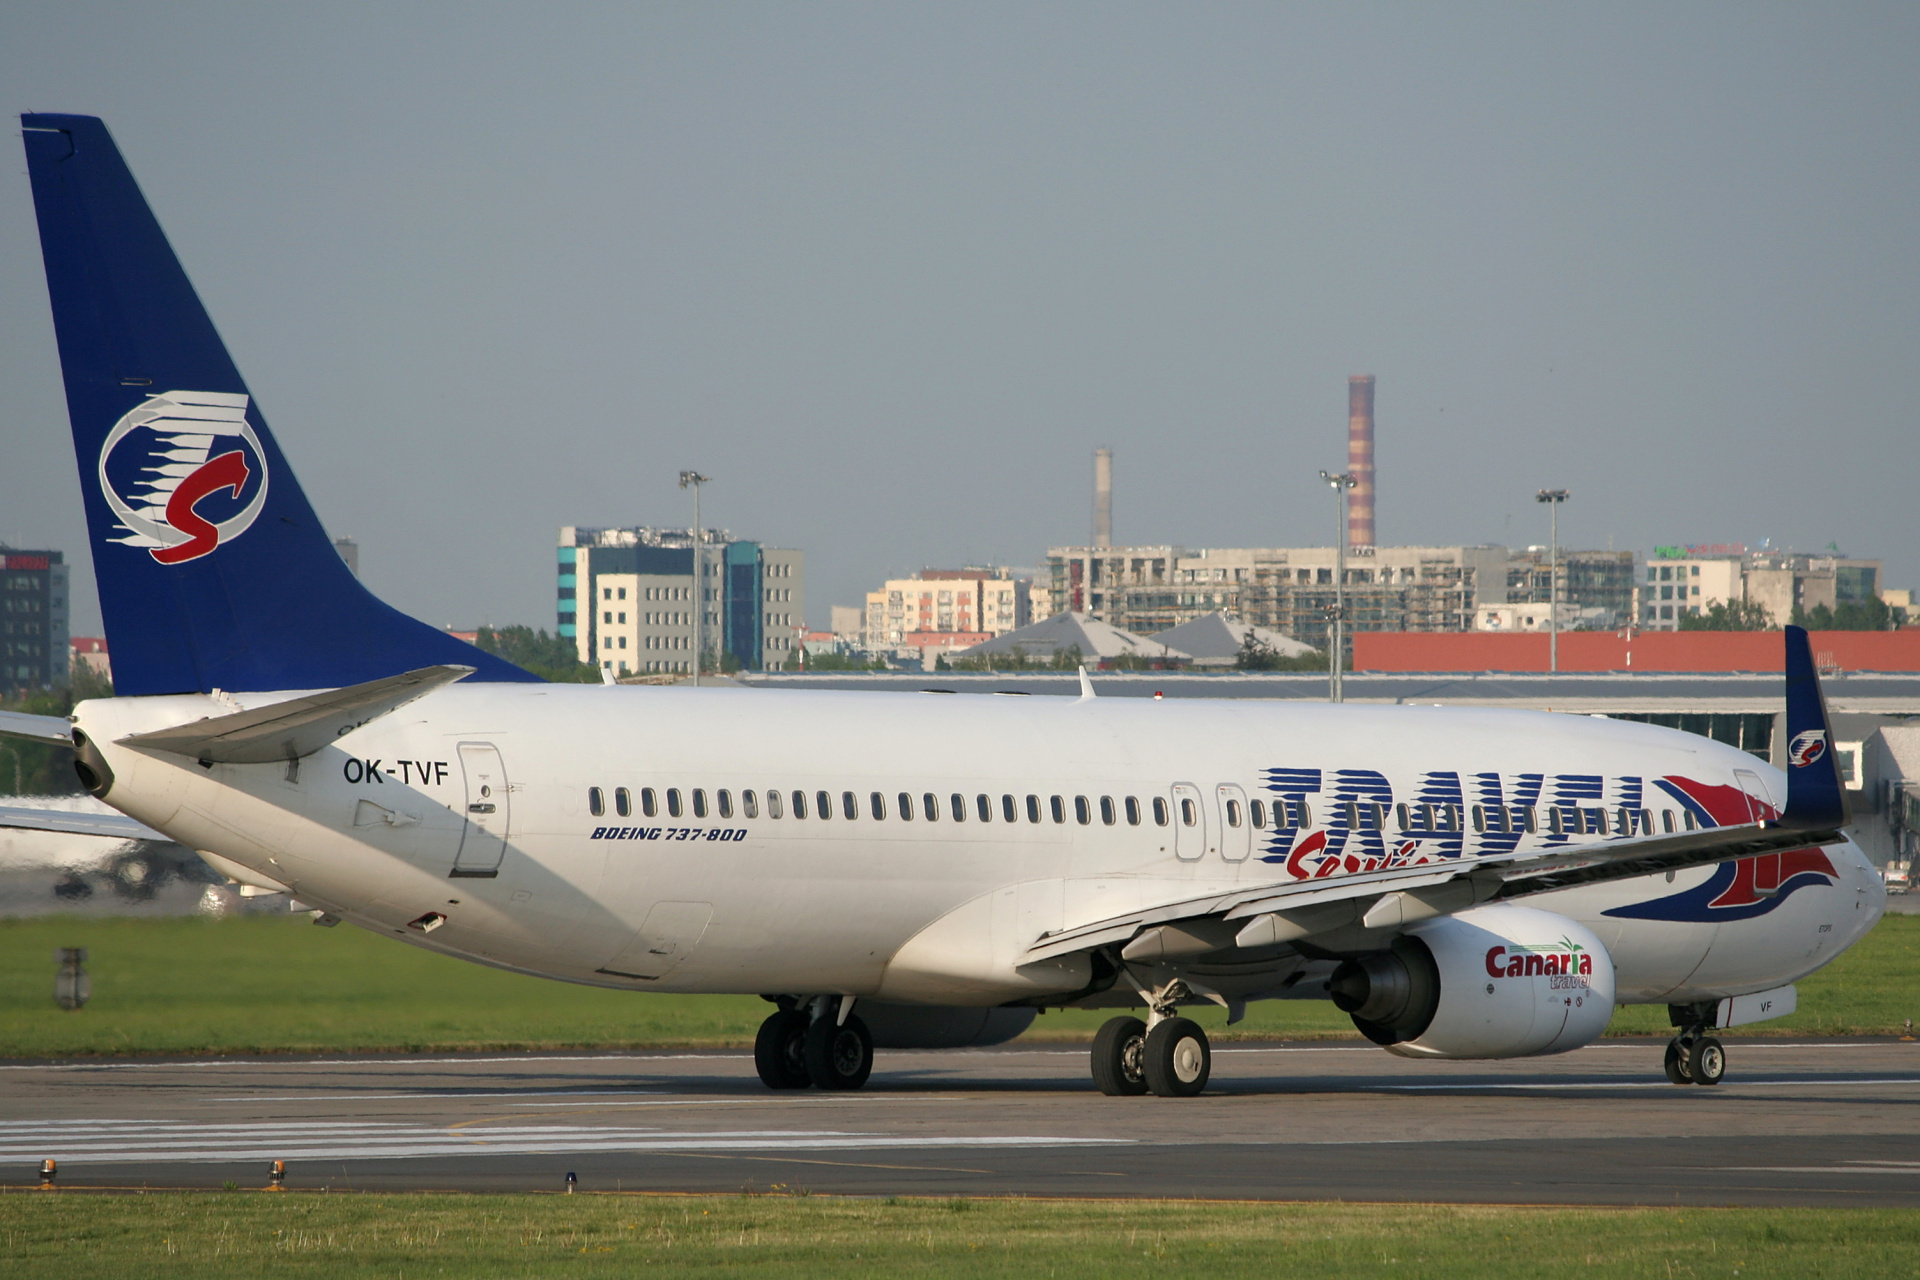 OK-TVF (Aircraft » EPWA Spotting » Boeing 737-800 » Travel Service Airlines)